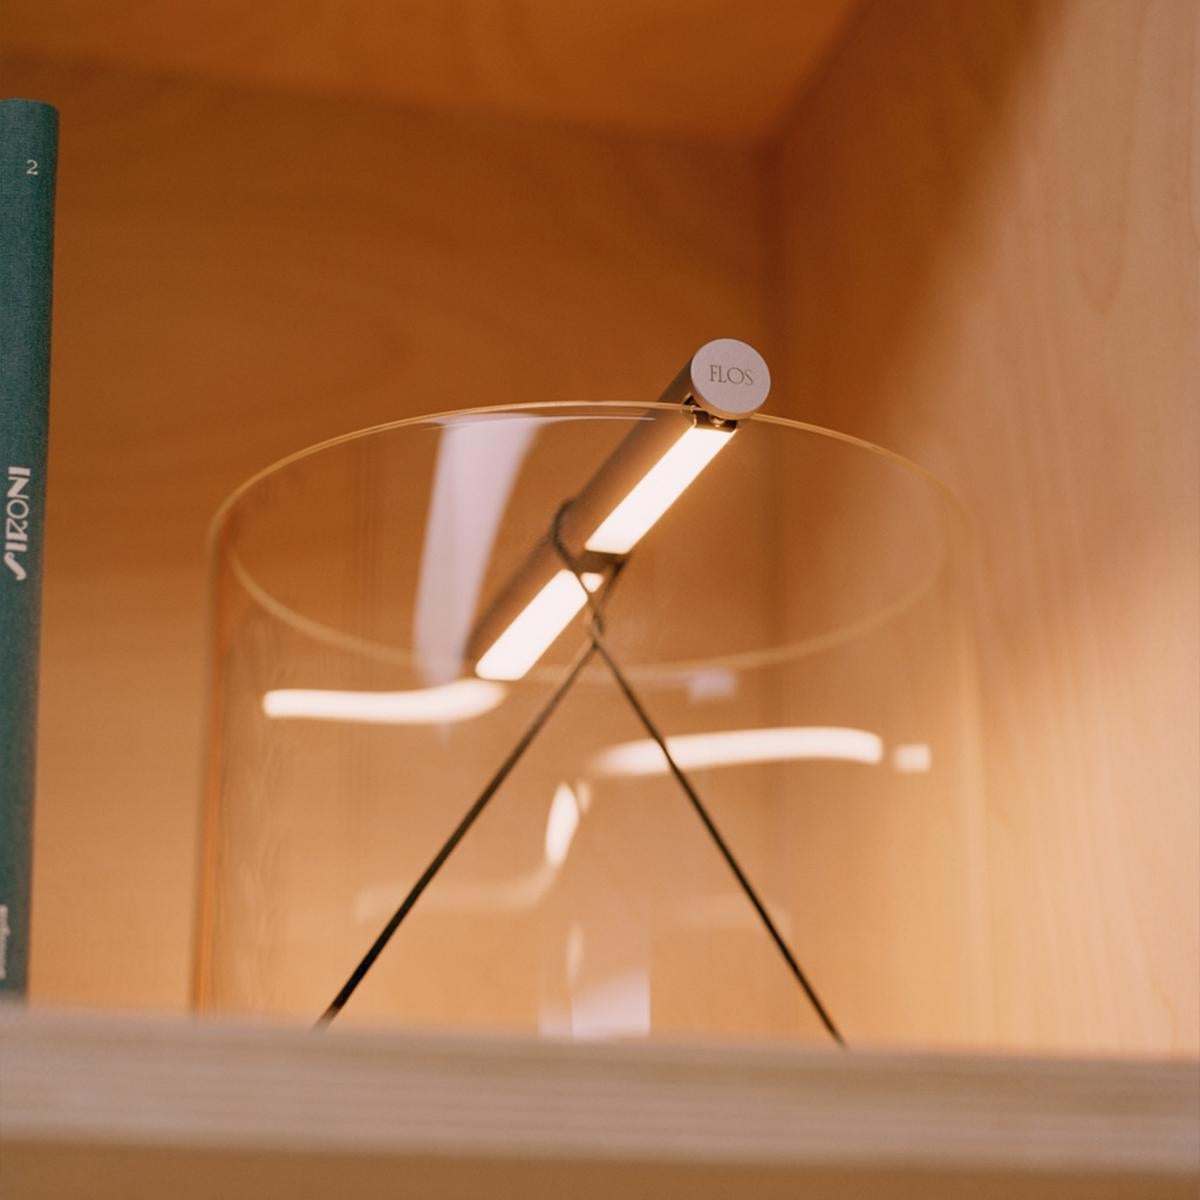 Flos To-Tie T2 Table Lamp in Anodized Natural by Guglielmo Poletti 1